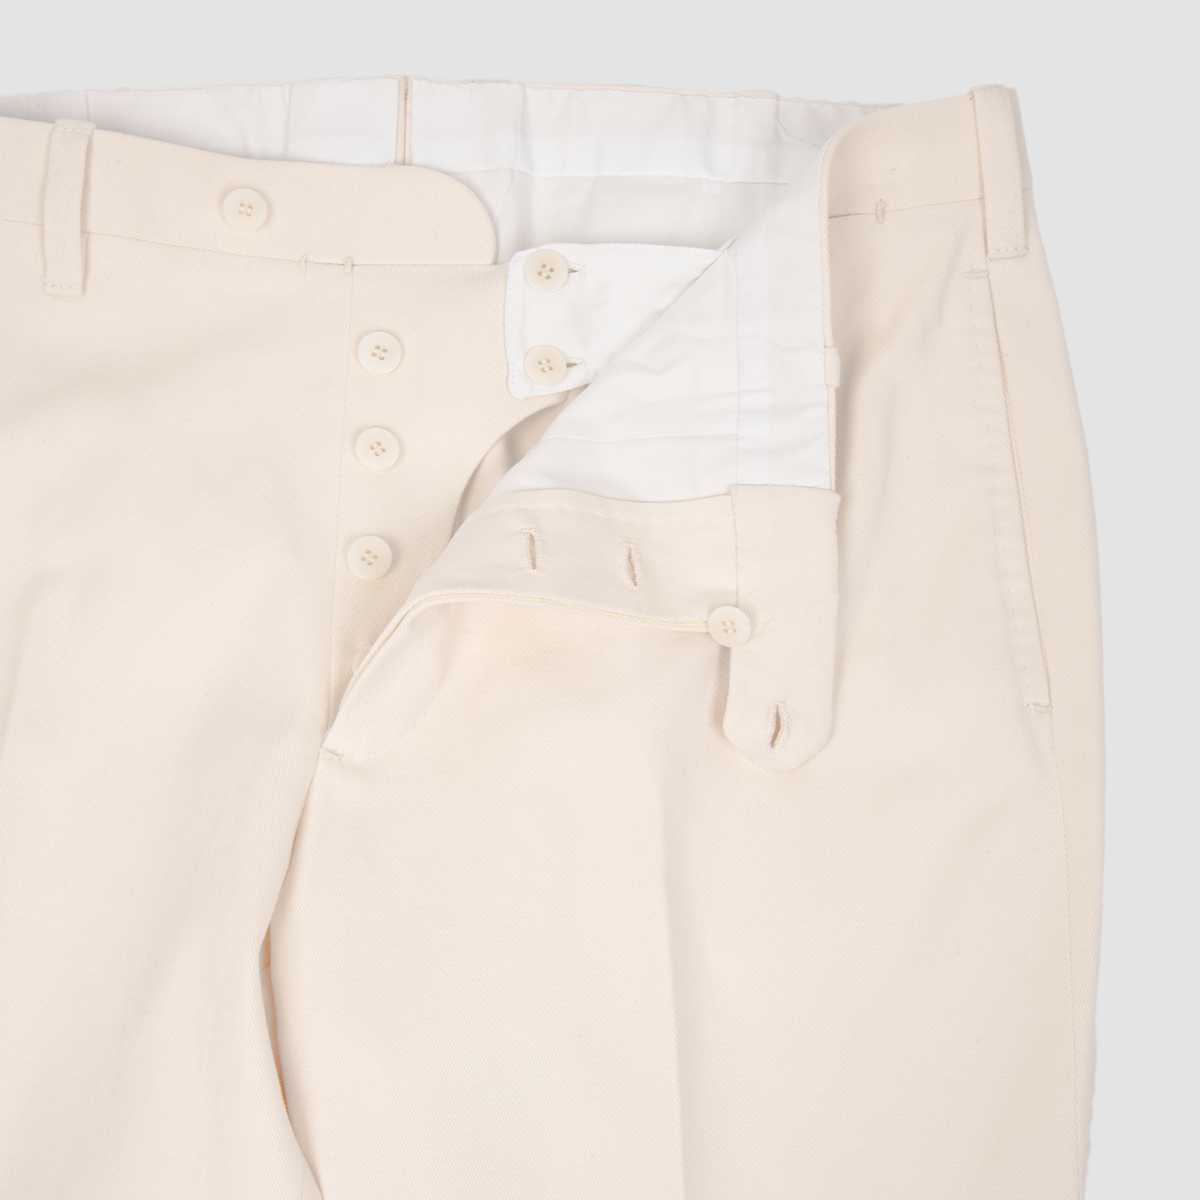 Woven Taylor Made Cream Trouser